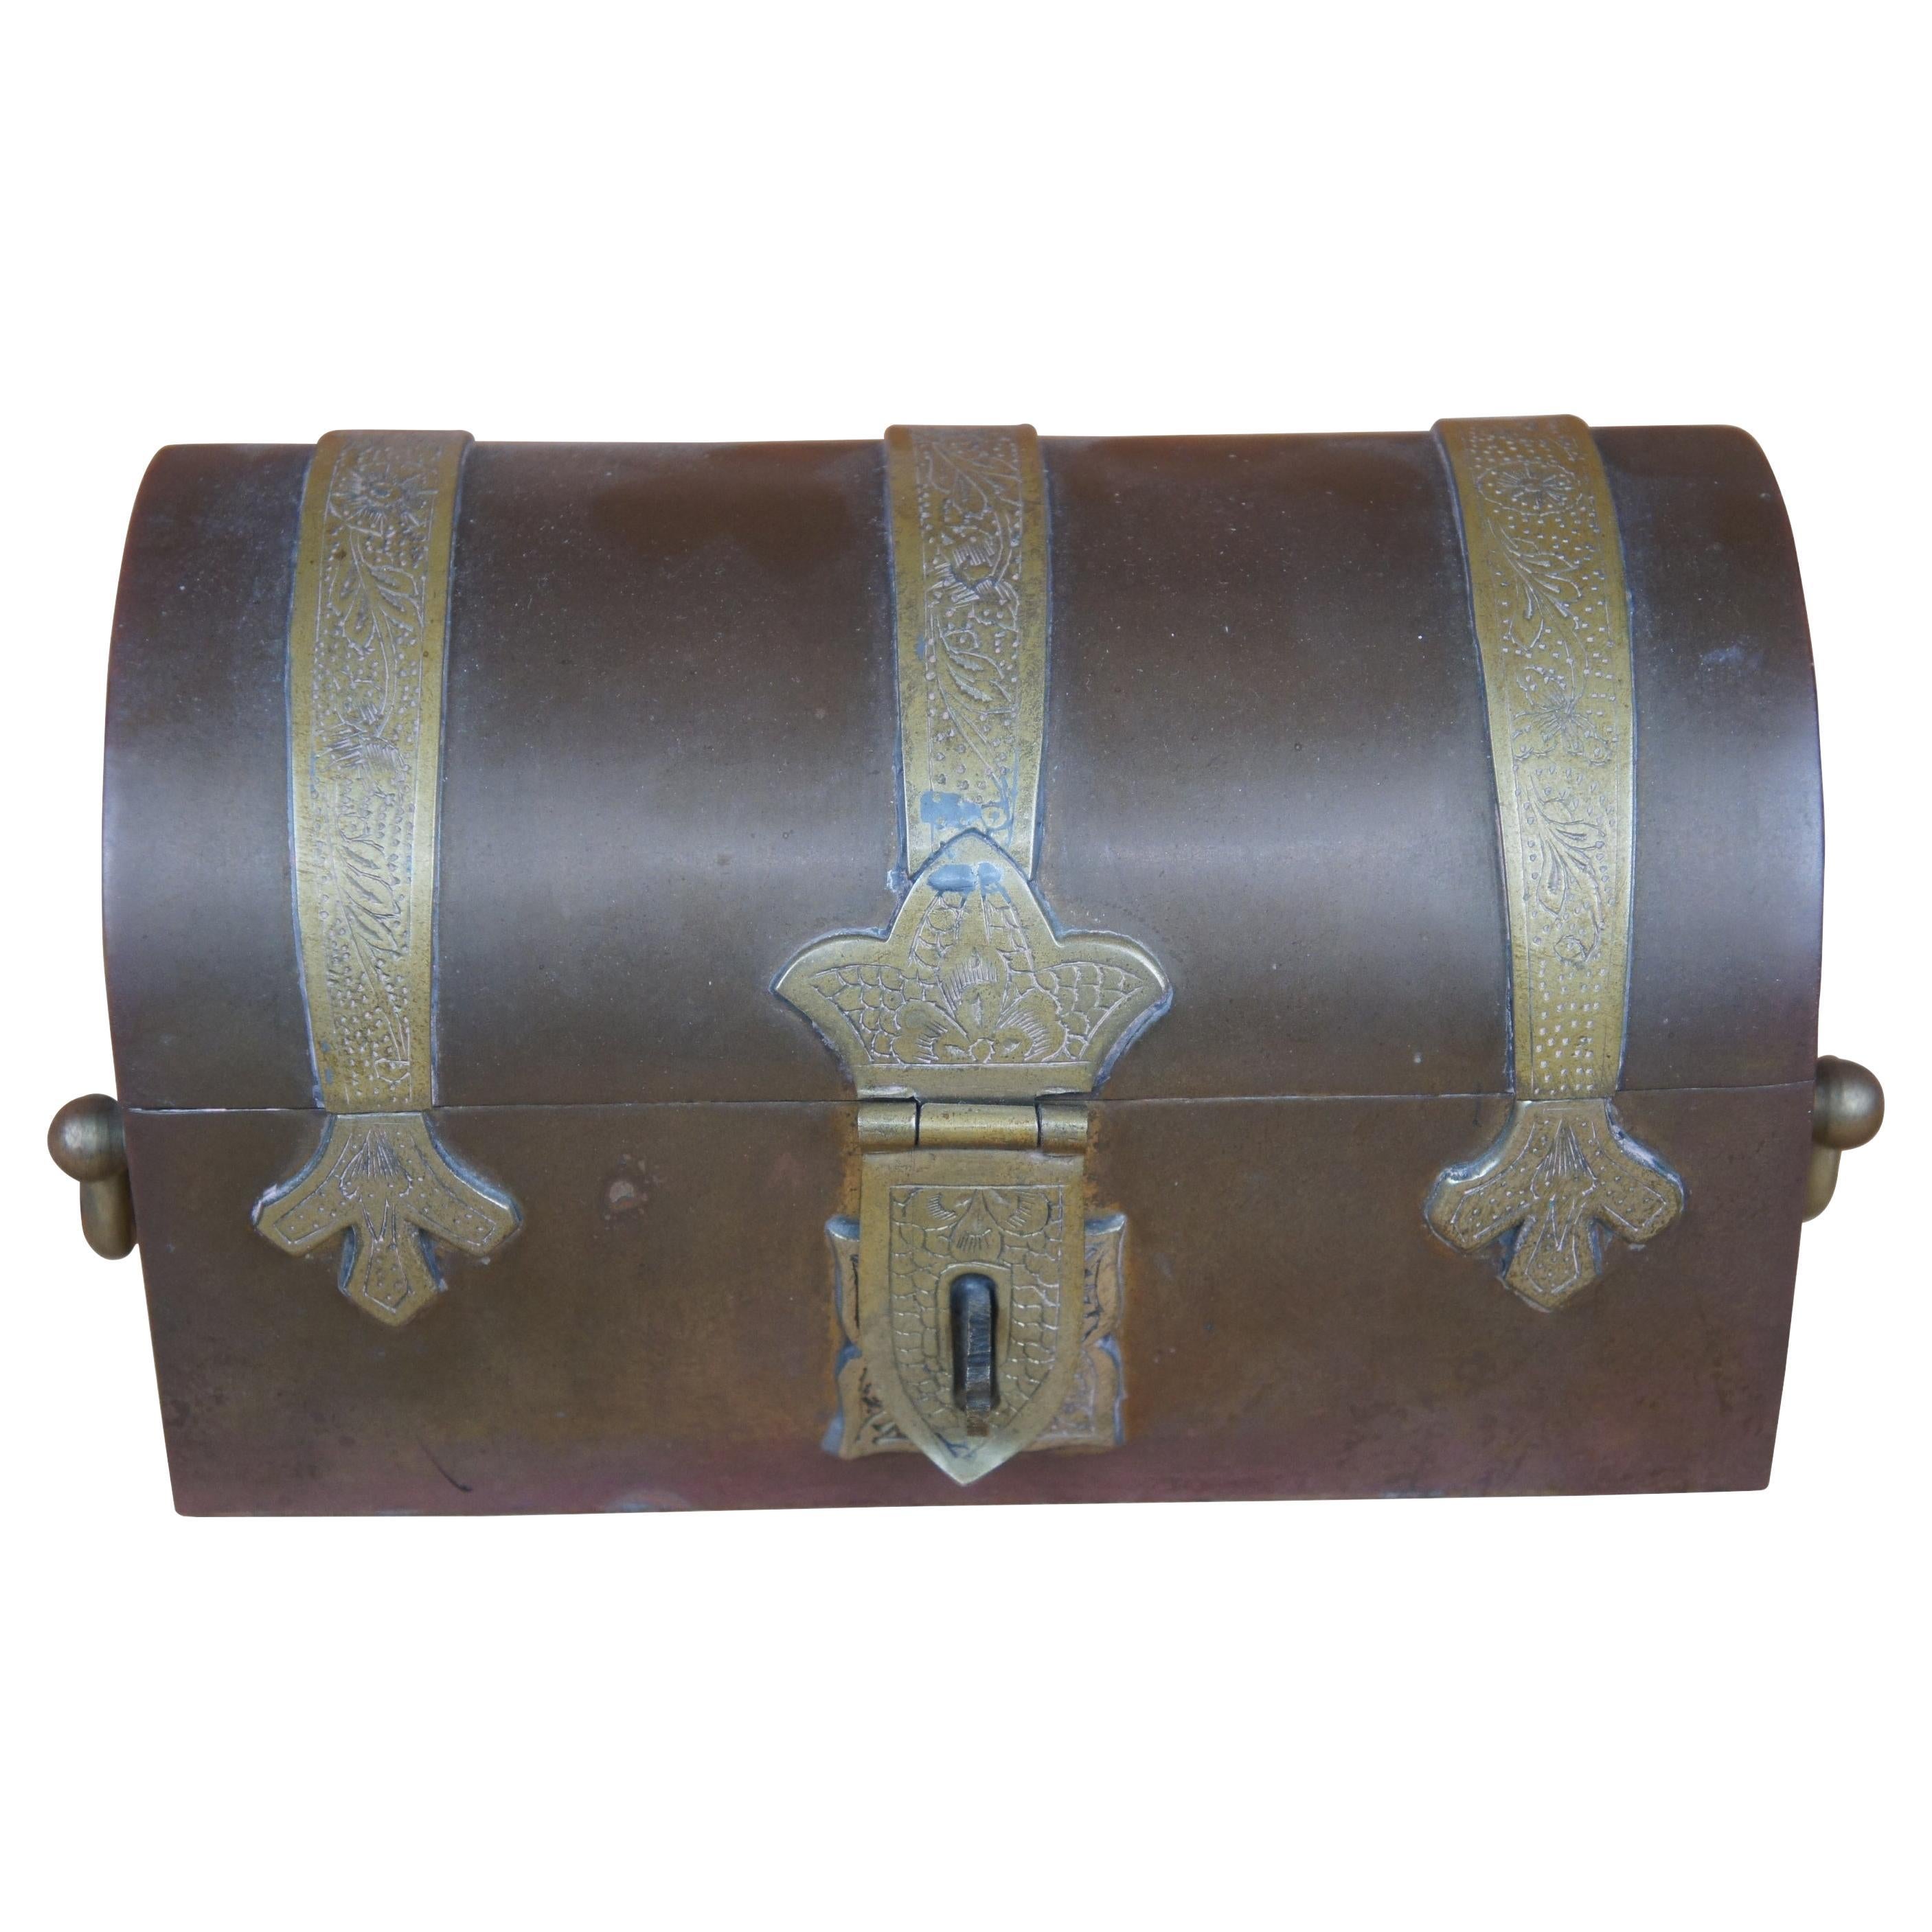 Antique Copper Brass Banded Domed Strongbox Treasure Chest Dowry Keepsake Box